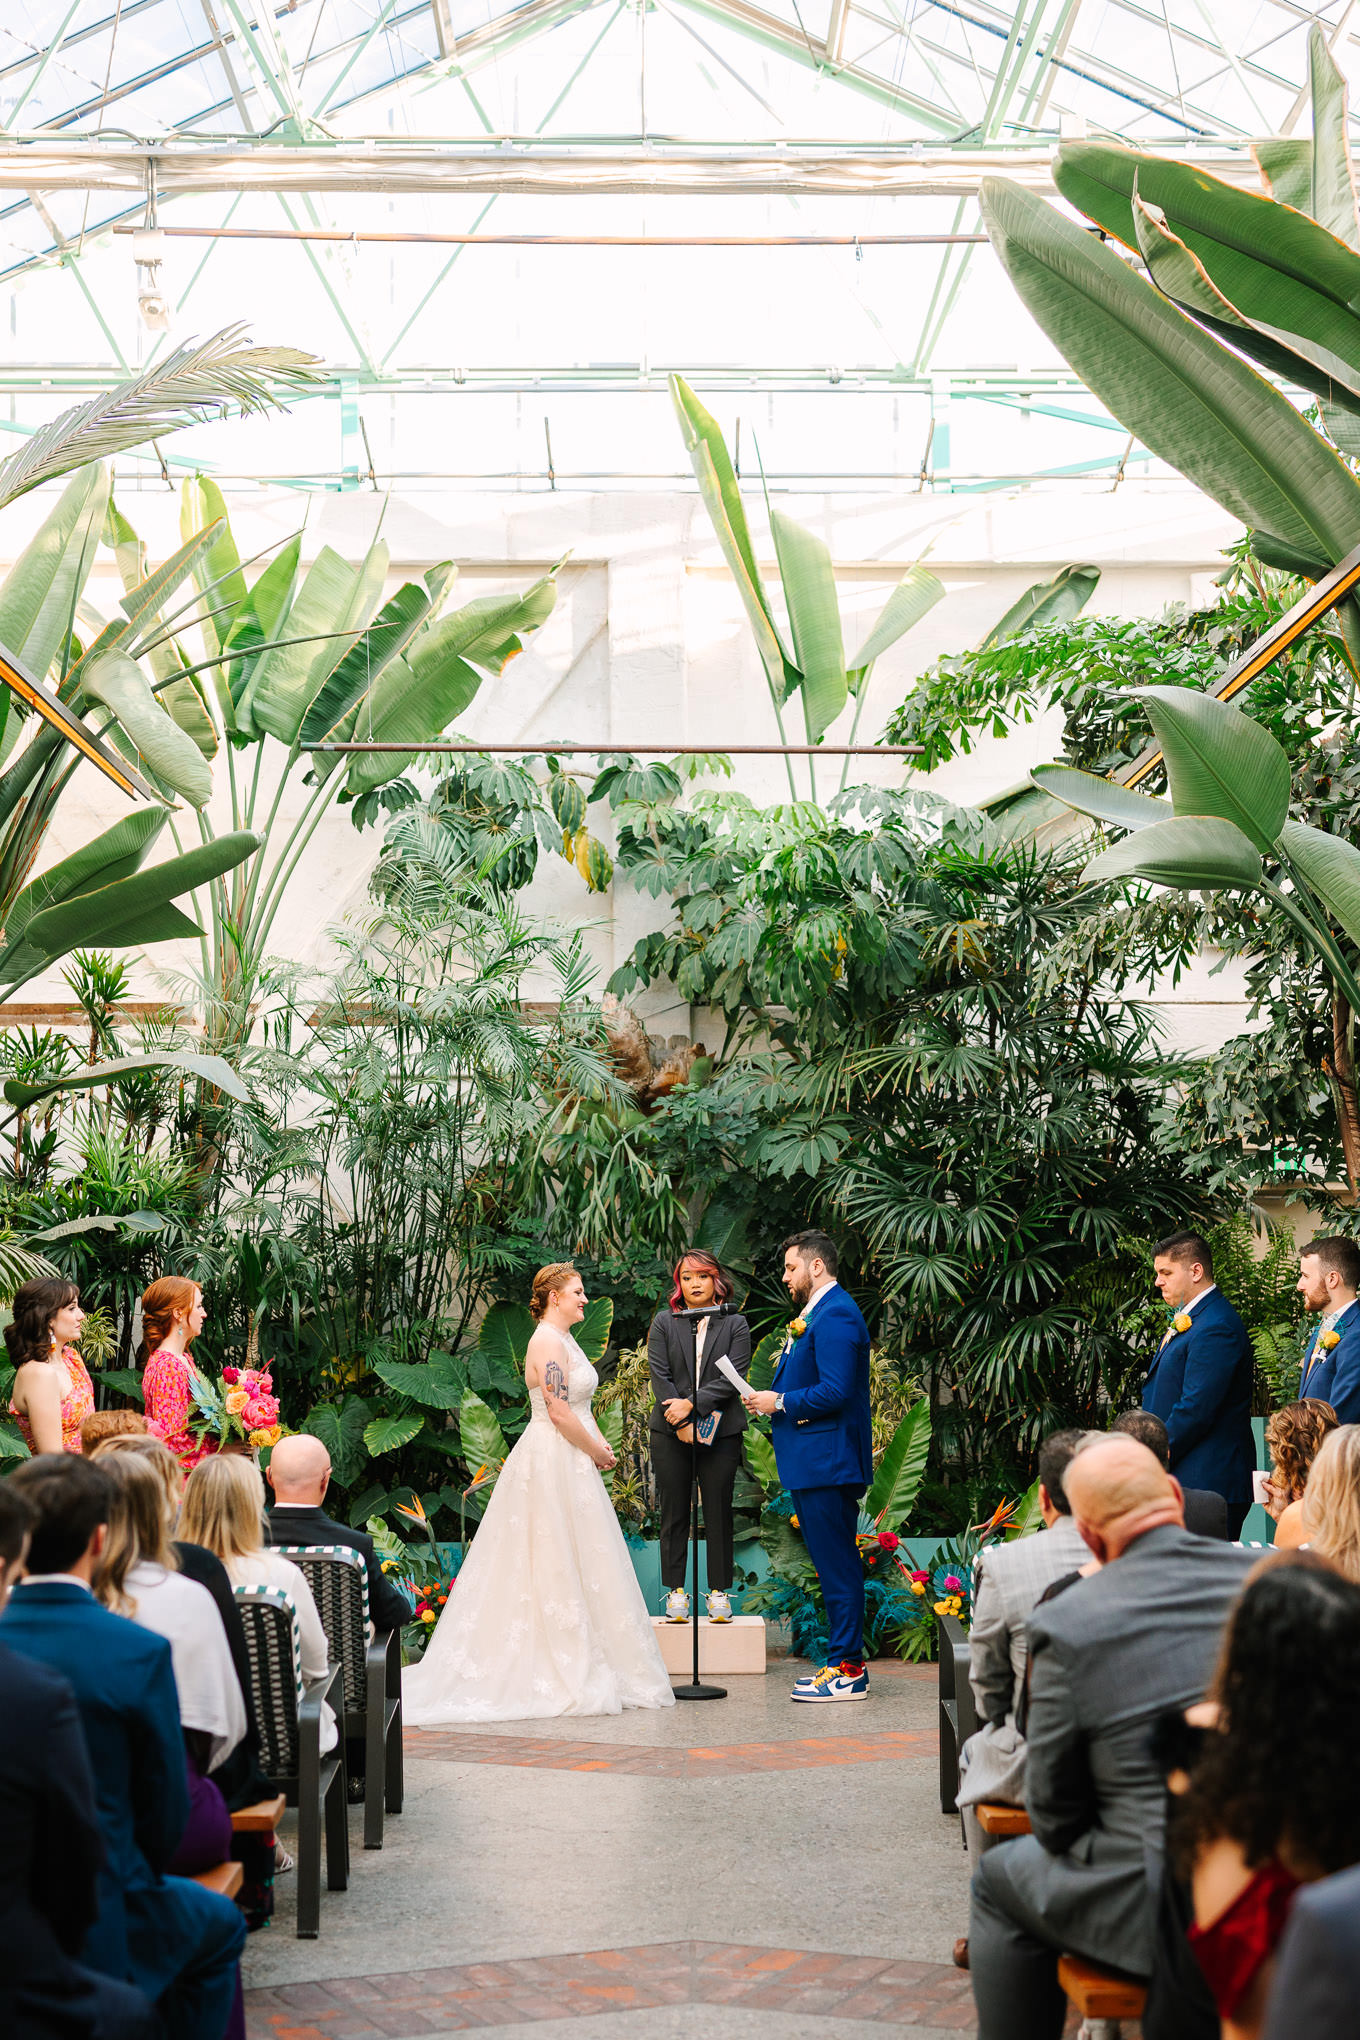 Downtown Los Angeles Valentine wedding | Wedding and elopement photography roundup | Los Angeles and Palm Springs photographer | #losangeleswedding #palmspringswedding #elopementphotographer Source: Mary Costa Photography | Los Angeles